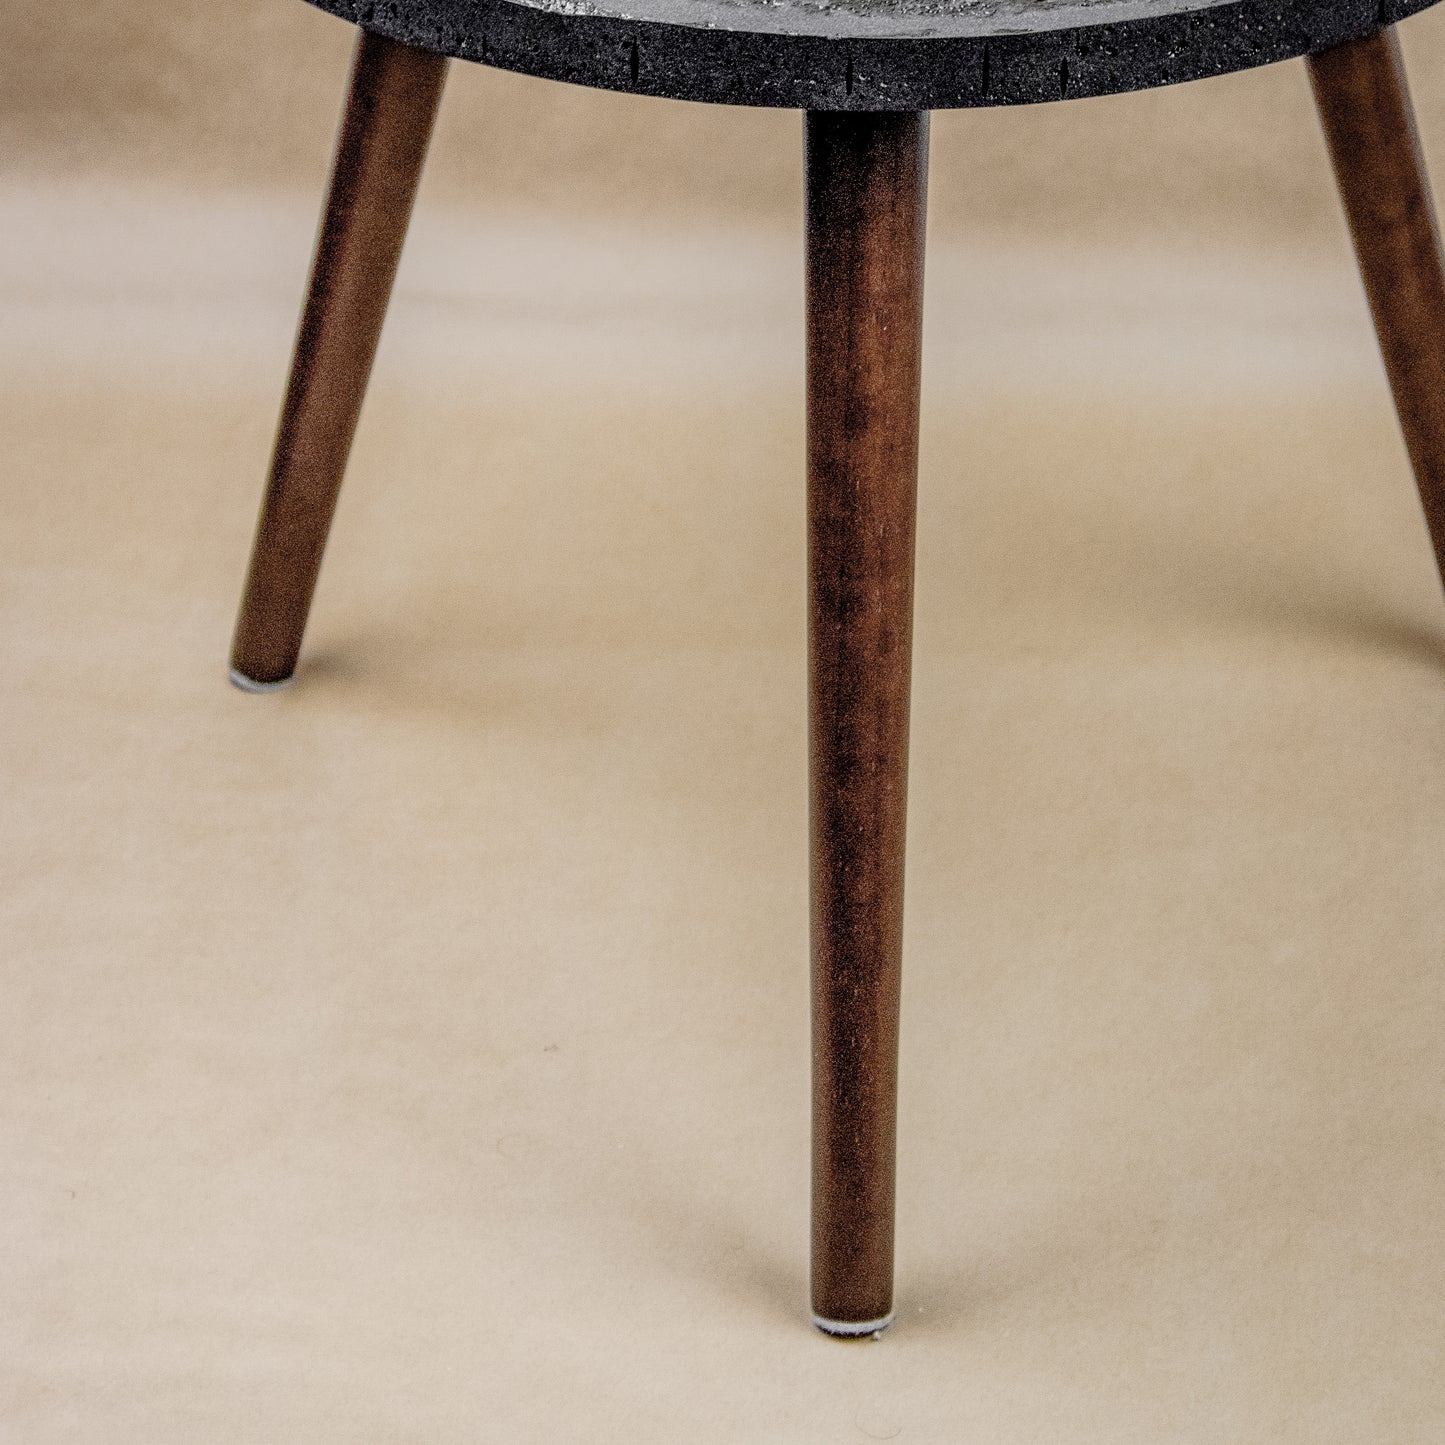 Innovative coffee tables for coffee lovers - Legs